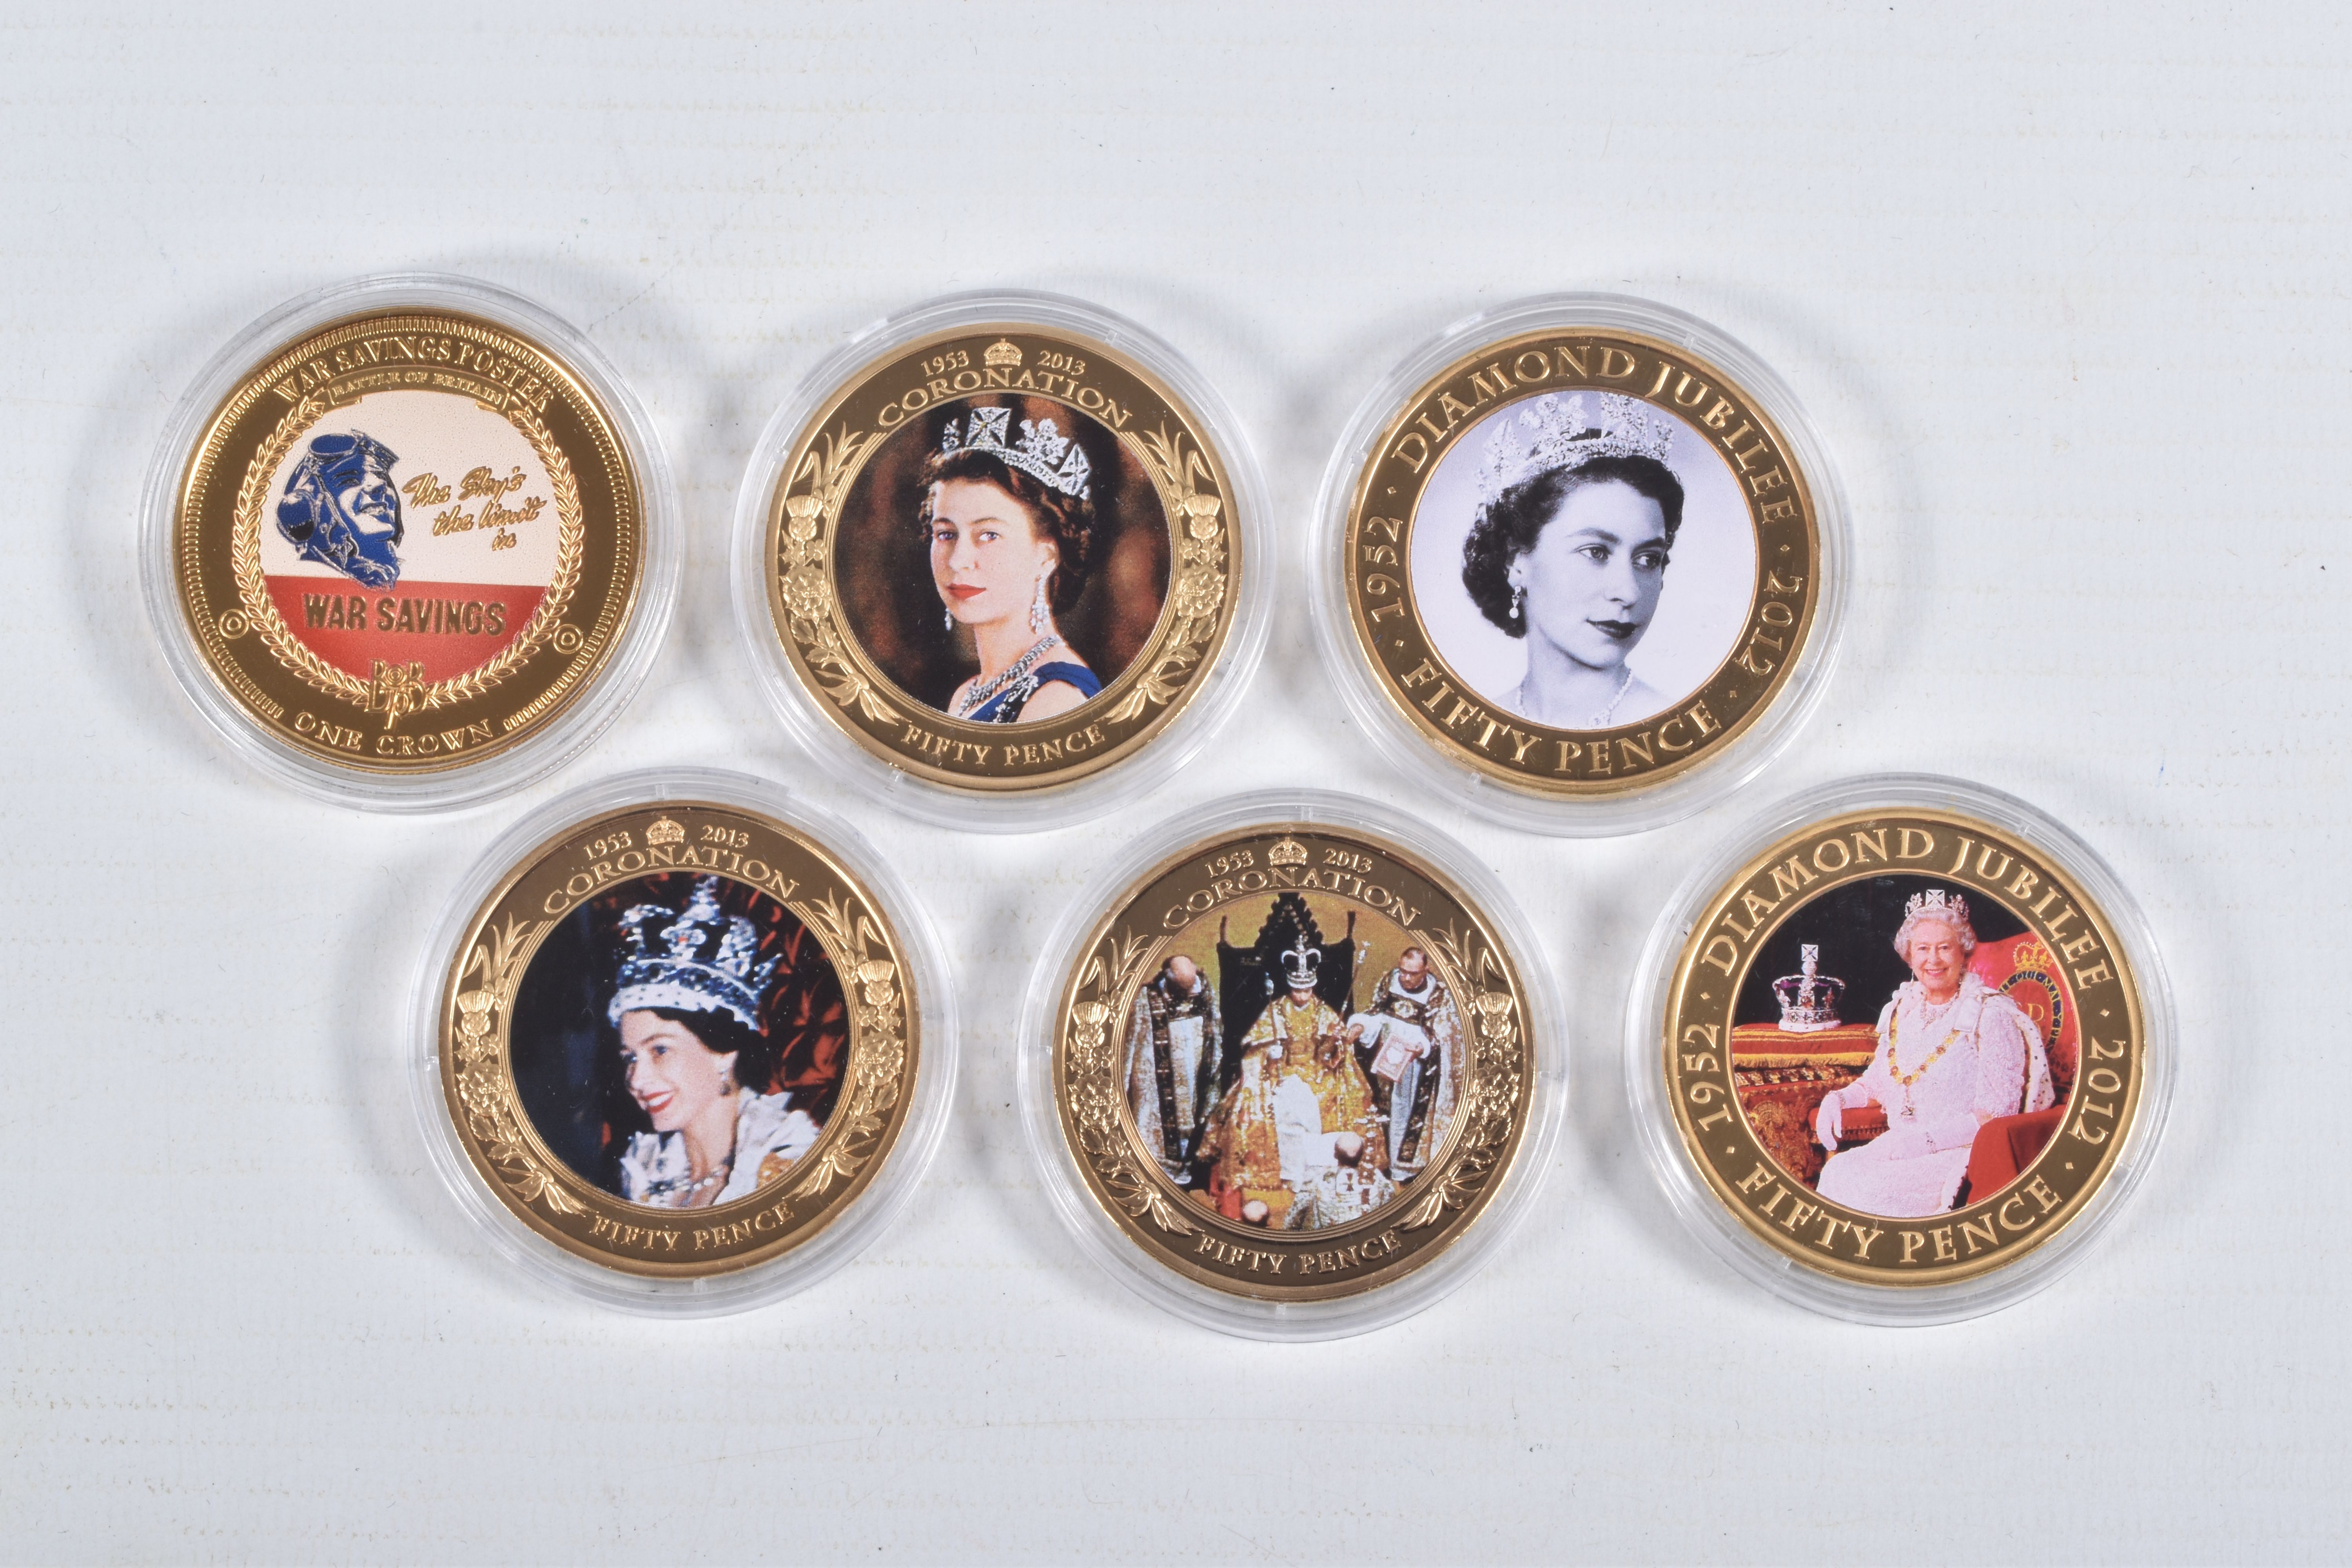 A PACKET CONTAINING SIX QUEEN ELIZABETH II 2011-13 GOLD LAYERED AND PICTORIAL COINS, Jersey,